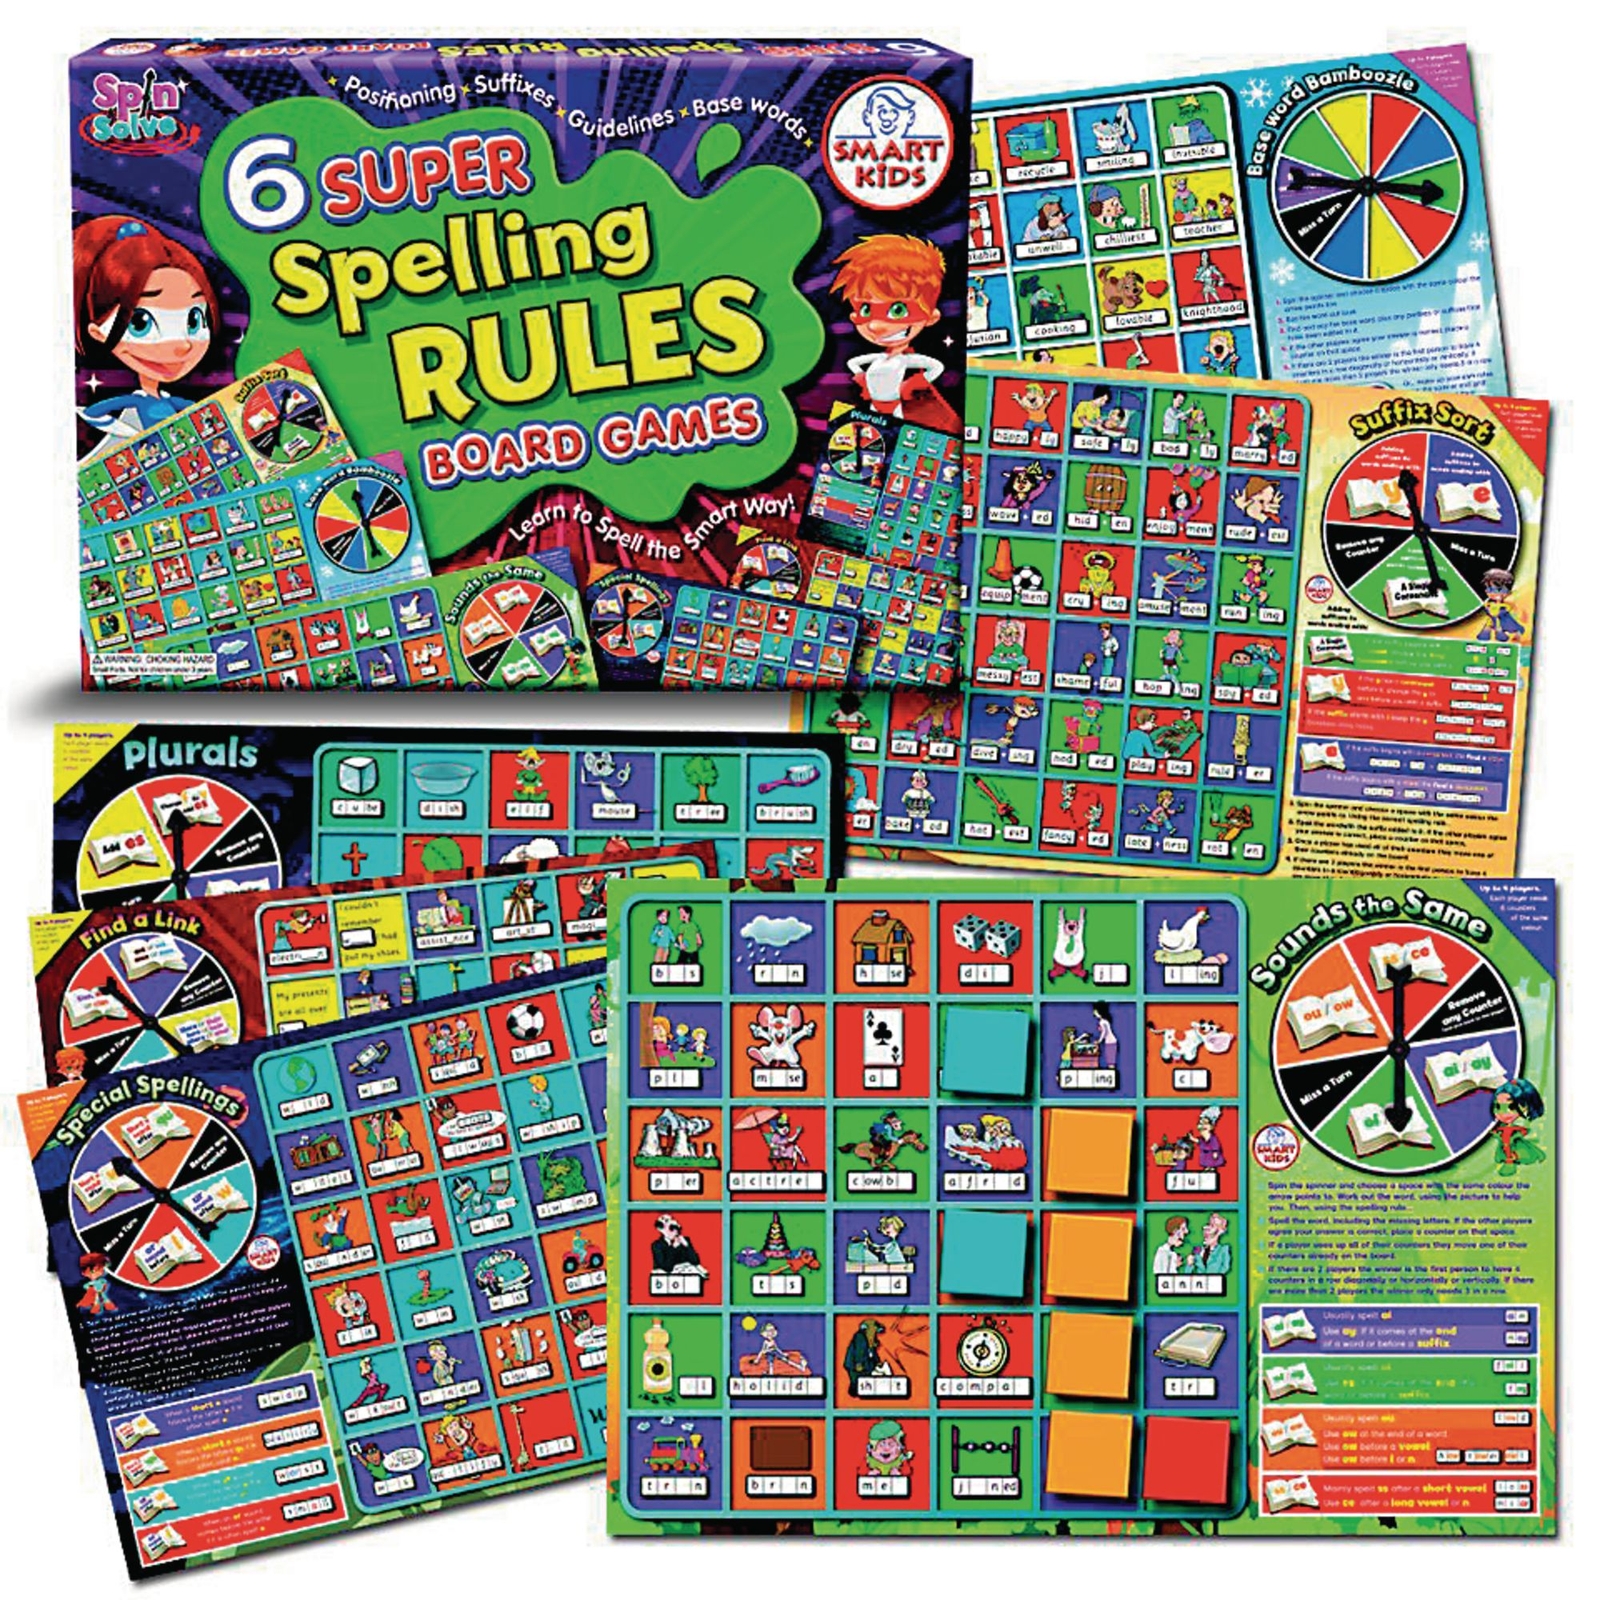 6 Super Spelling Rules Board Games - Ages 7-11 - Each